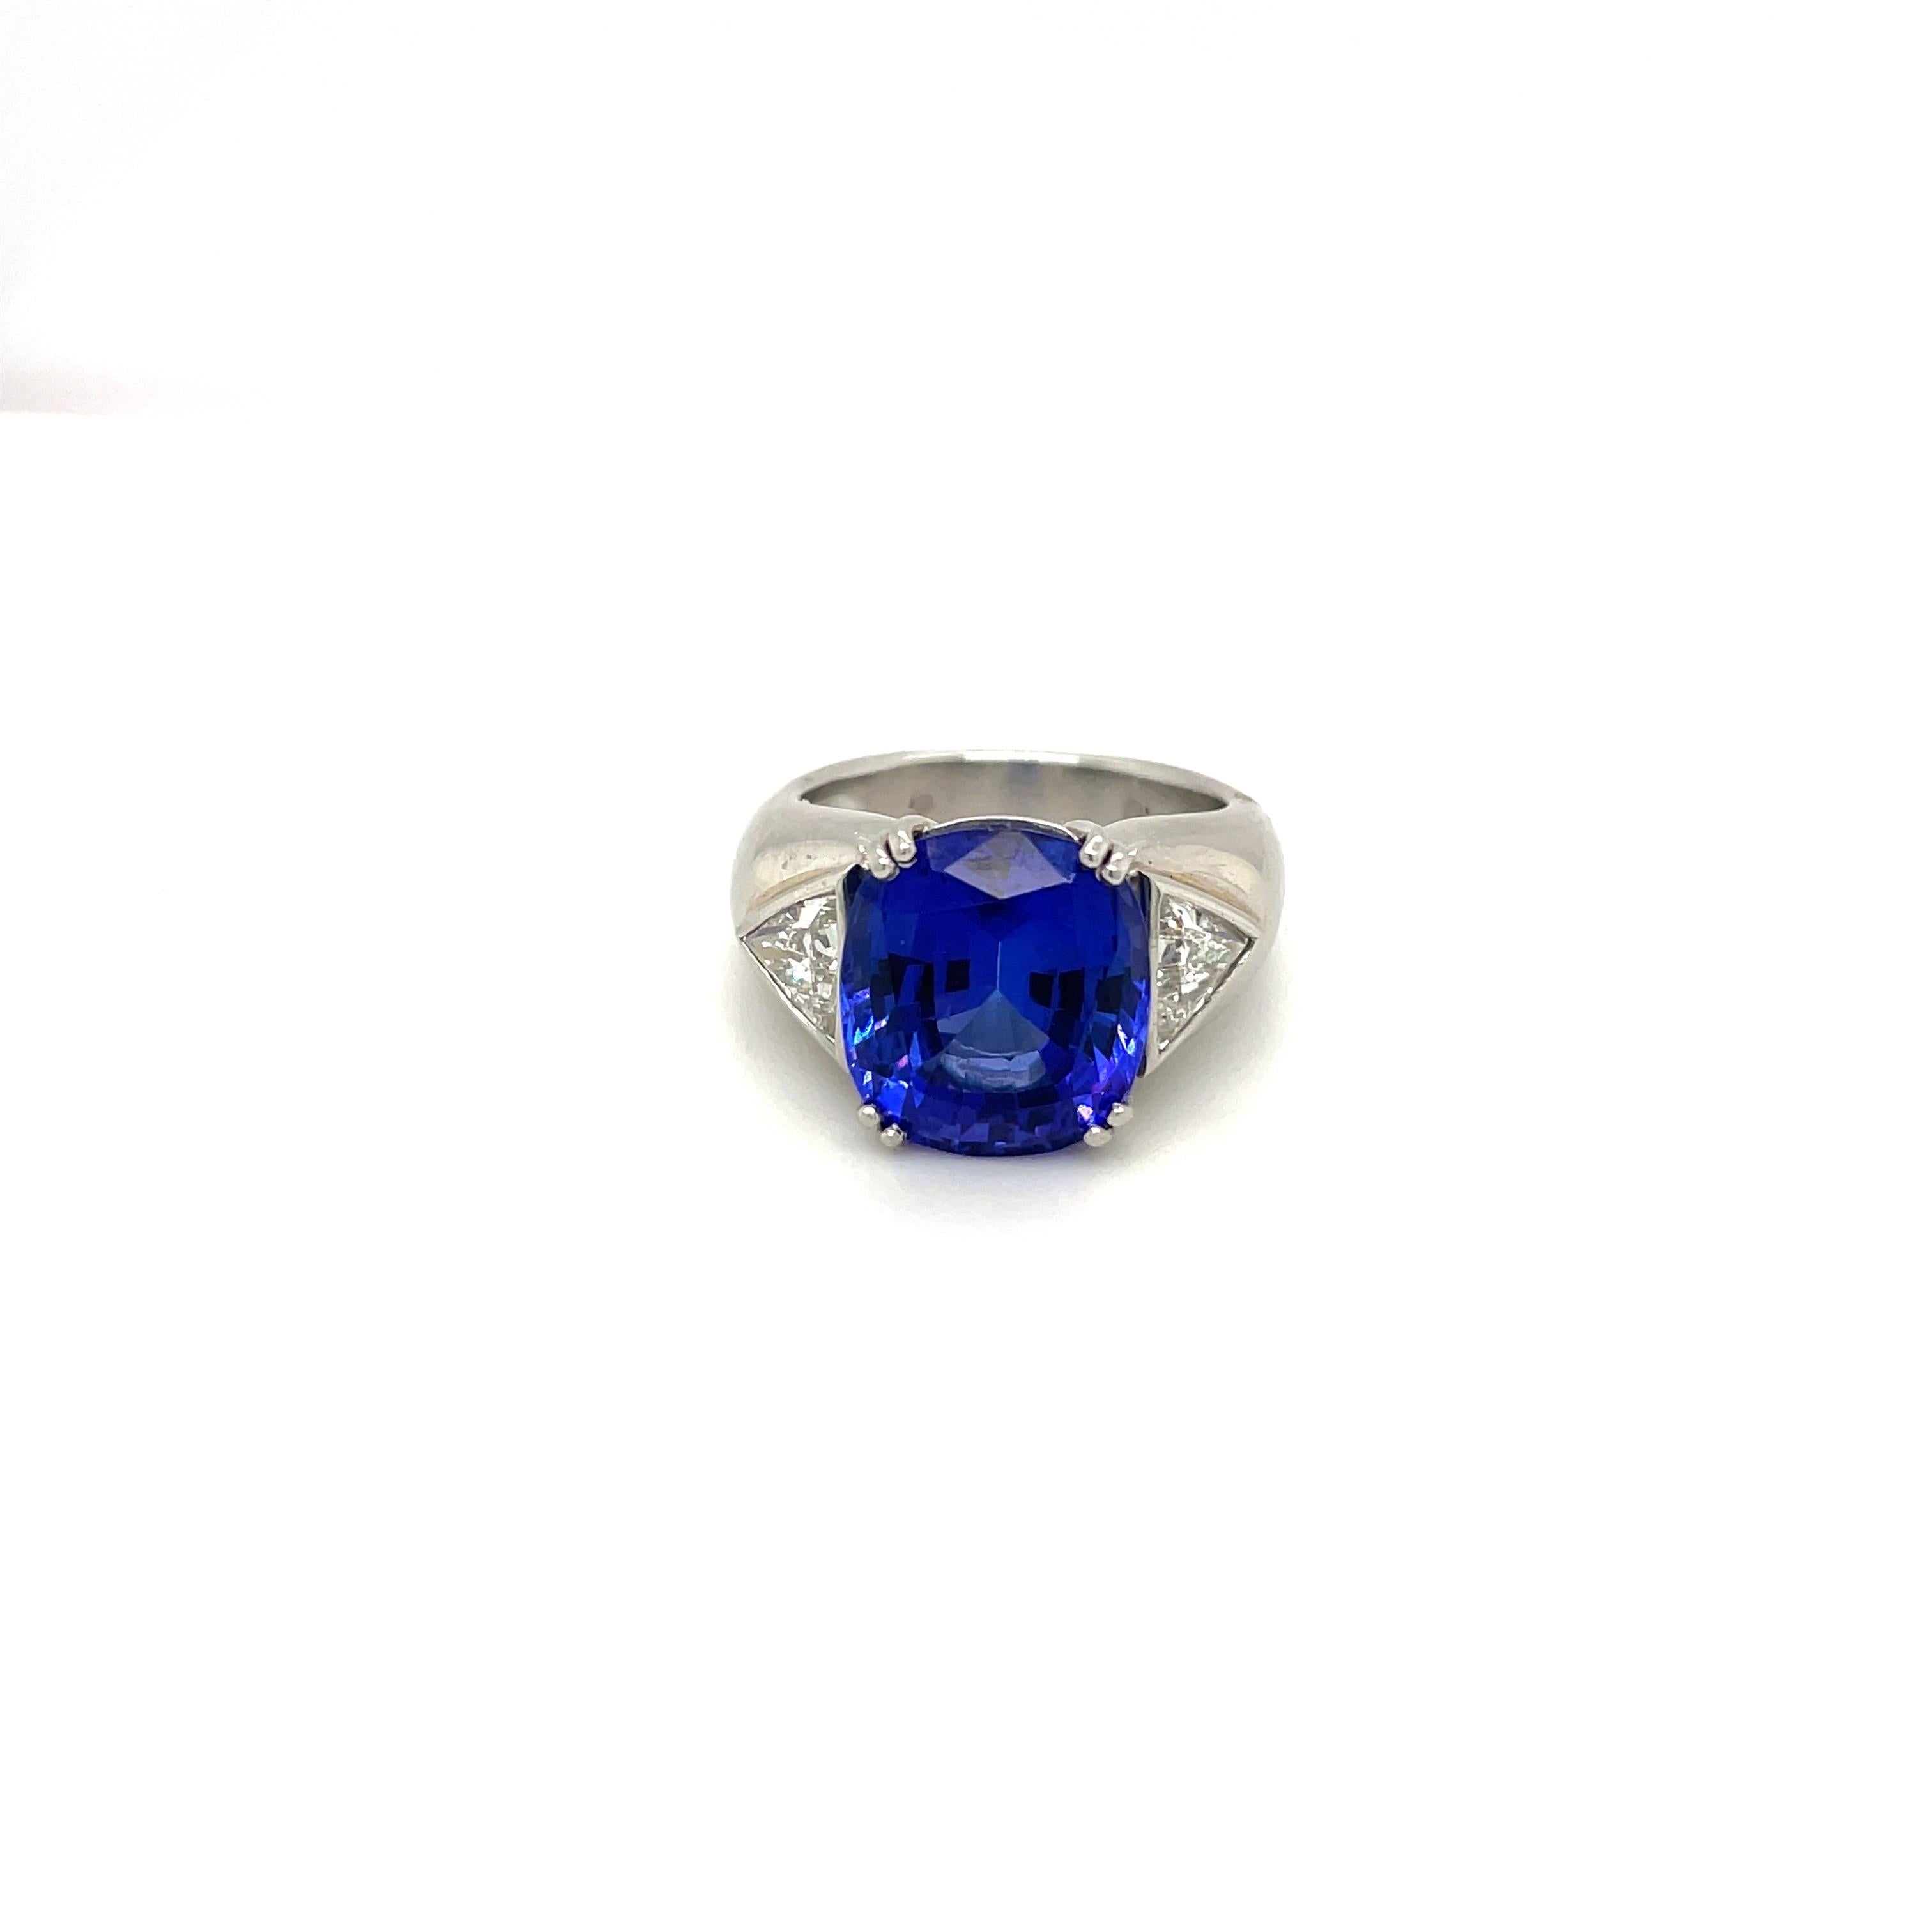 Somewhere between a fiery blue and vibrant violet this rare 9.51ct  tanzanite is set in a unique platinum band with 1.04 its of bezel set trillion cut diamonds. 
The ring is a size 7.75, and can be sized upon request
Appraisal available upon request